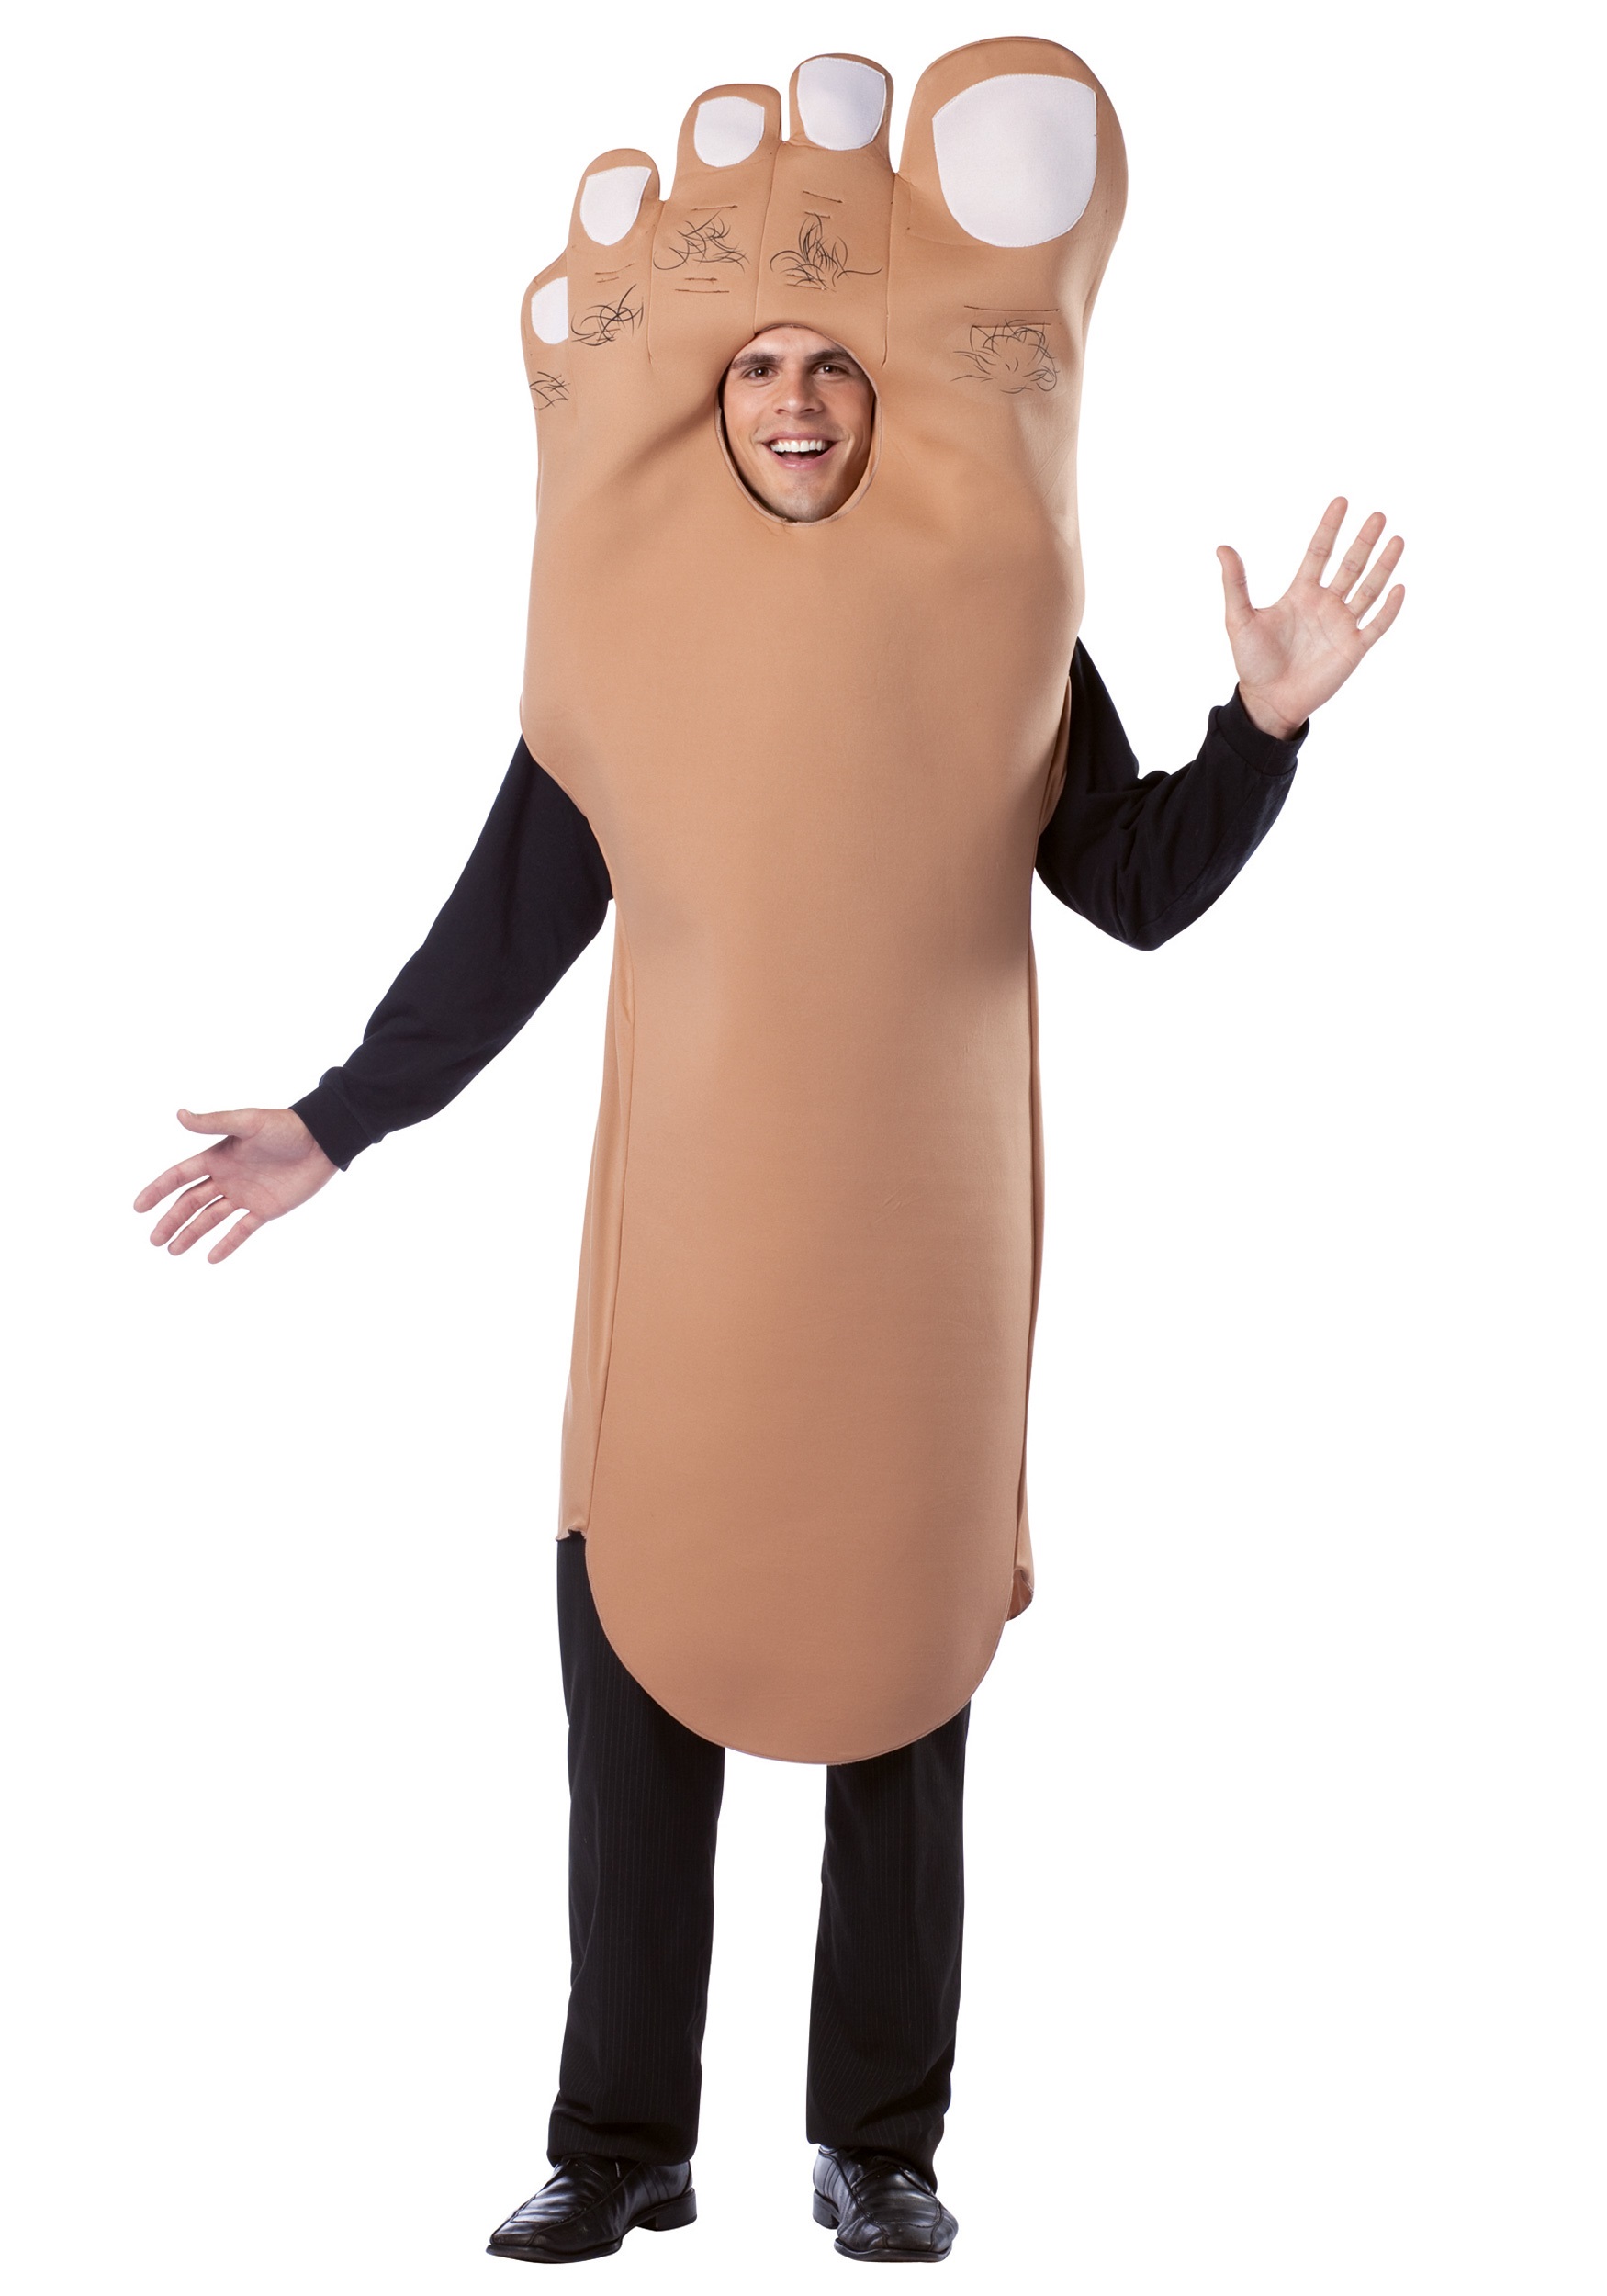 Funny Foot Costume Image